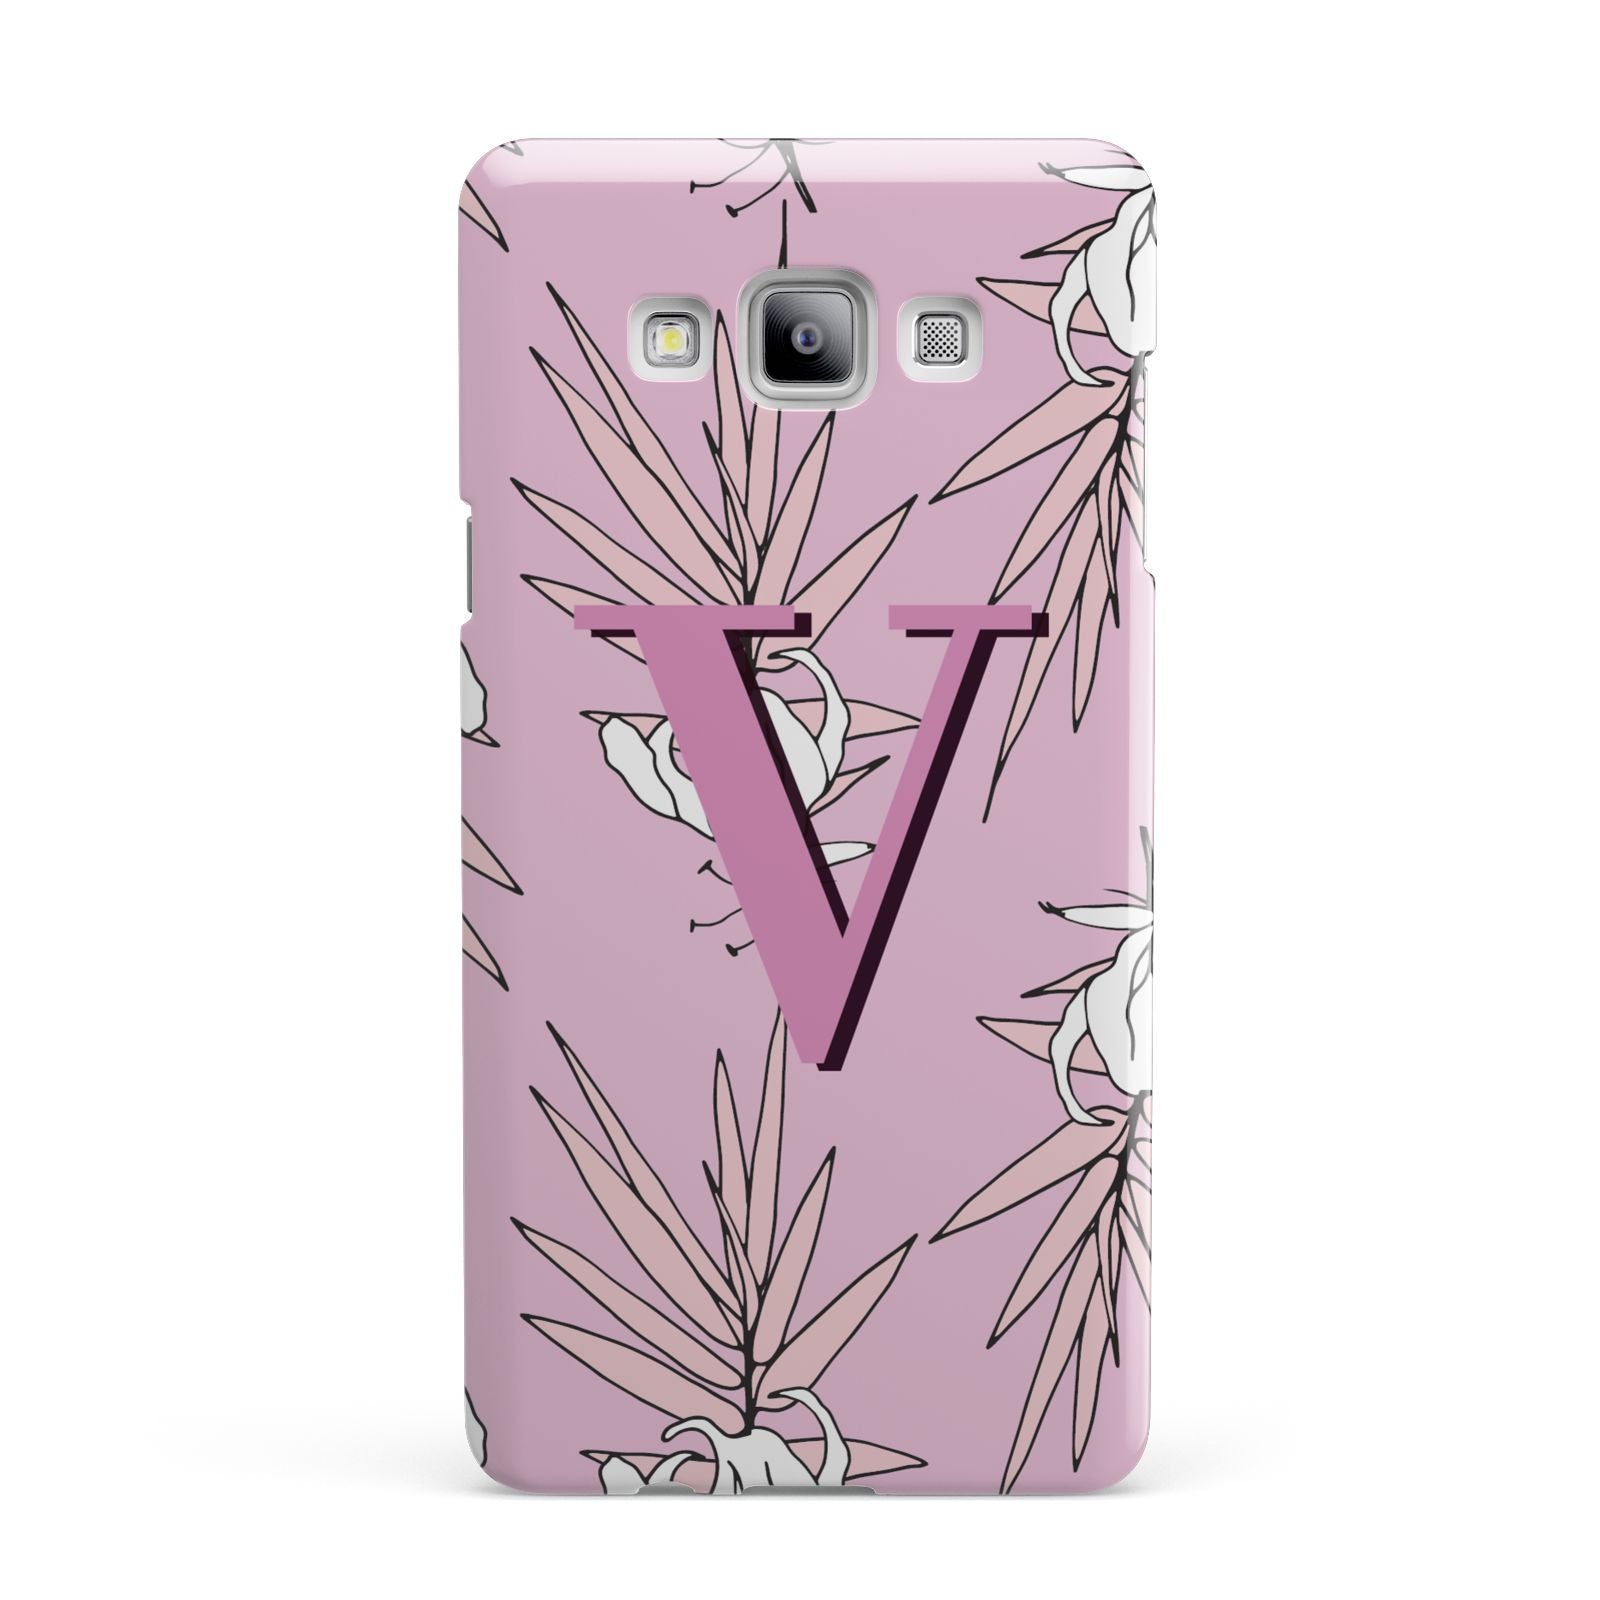 Personalised Pink and White Floral Monogram Samsung Galaxy A7 2015 Case